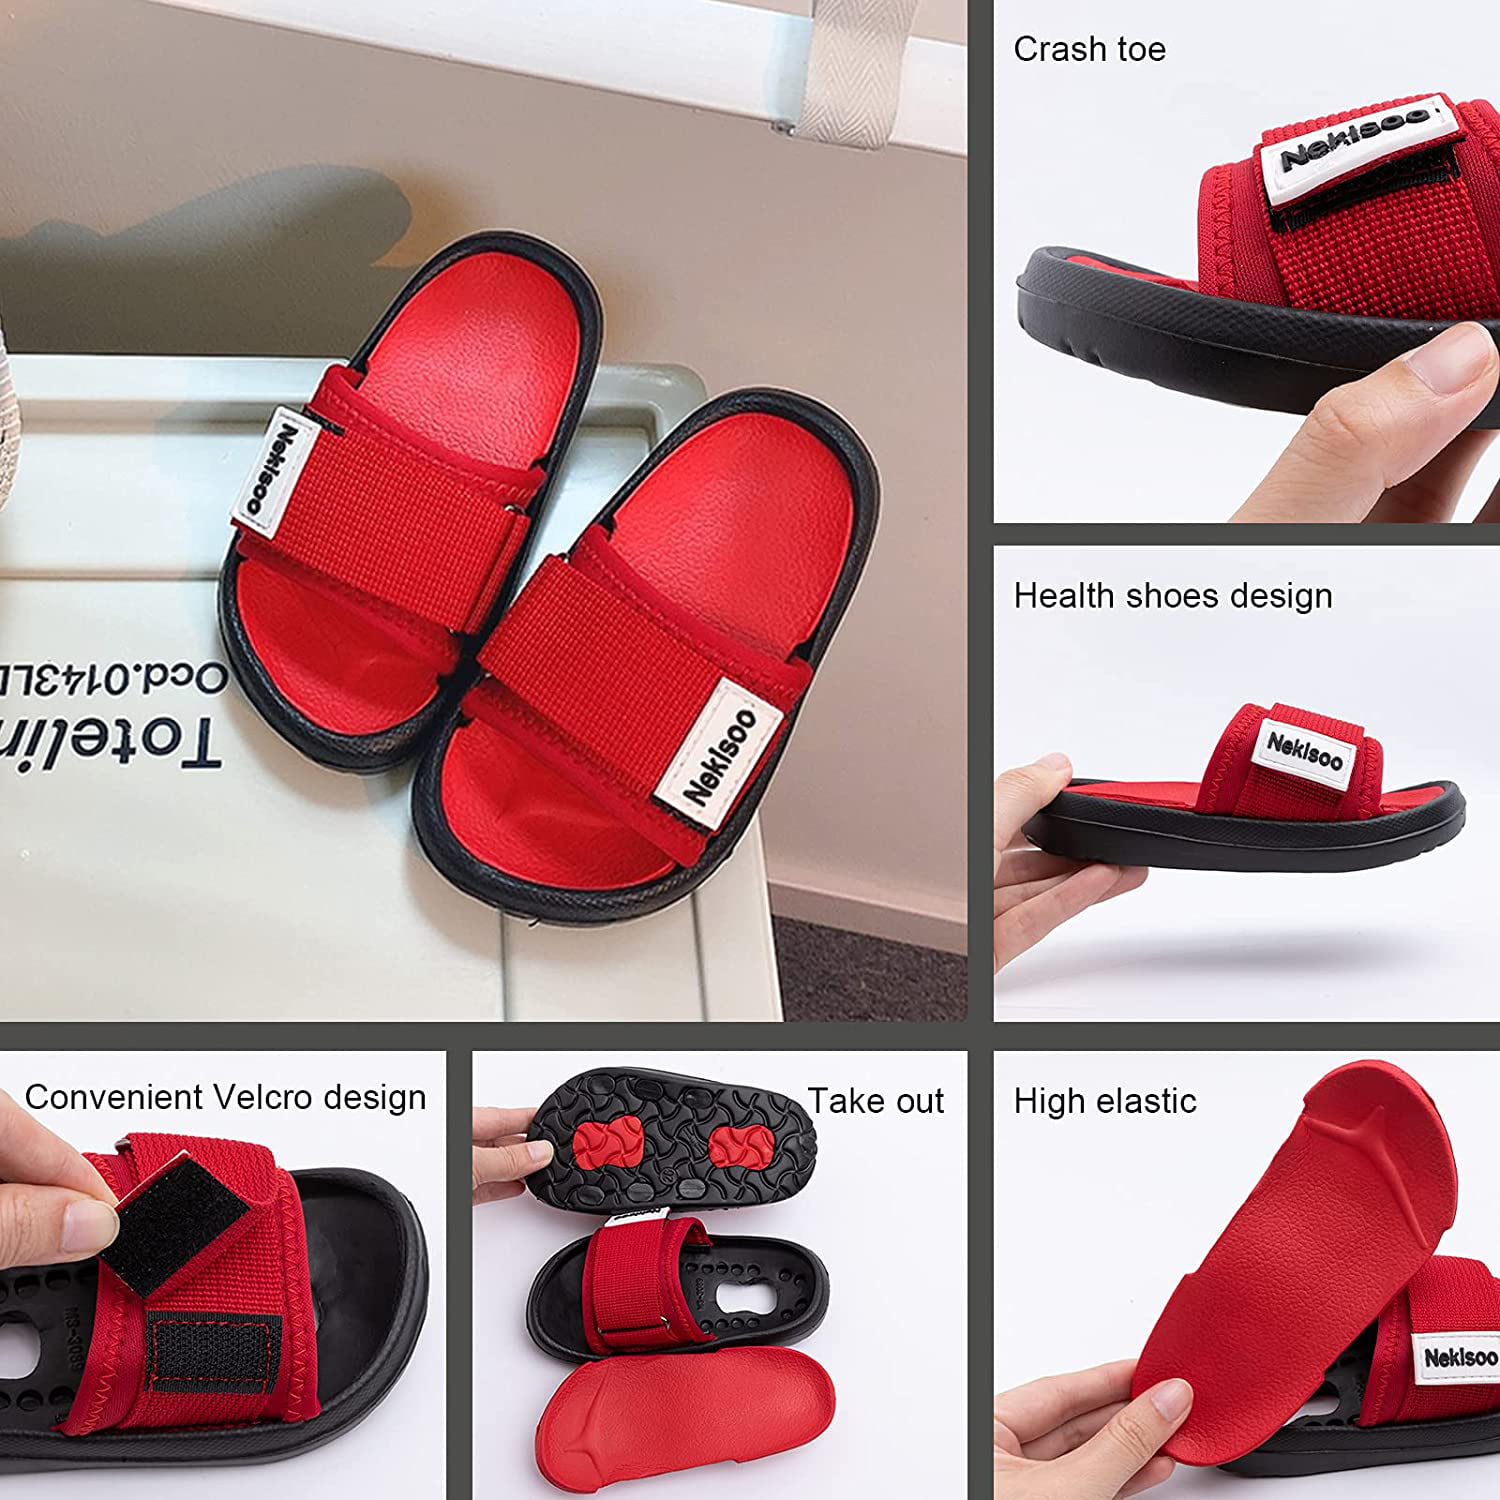 Supreme Red Slippers for Men